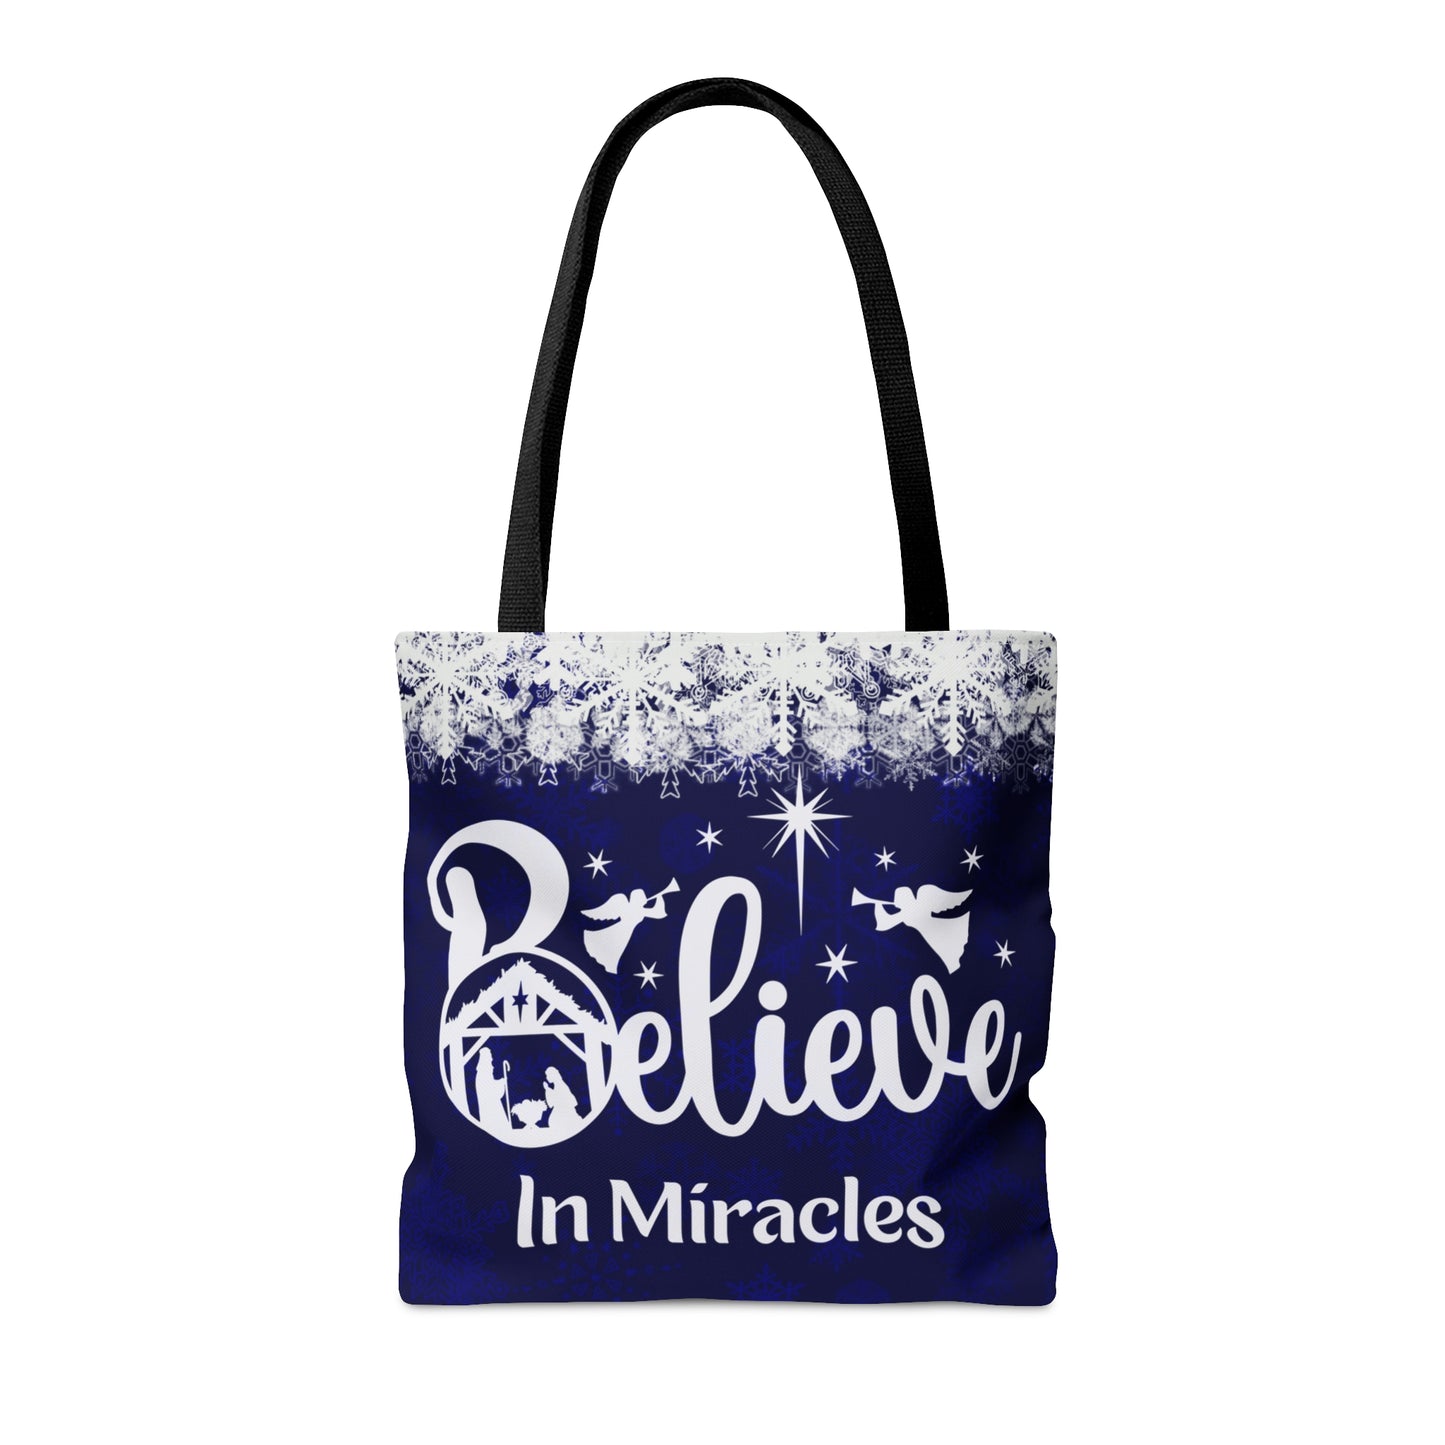 Nativity Scene Believe In Miracles Christmas Tote Bag